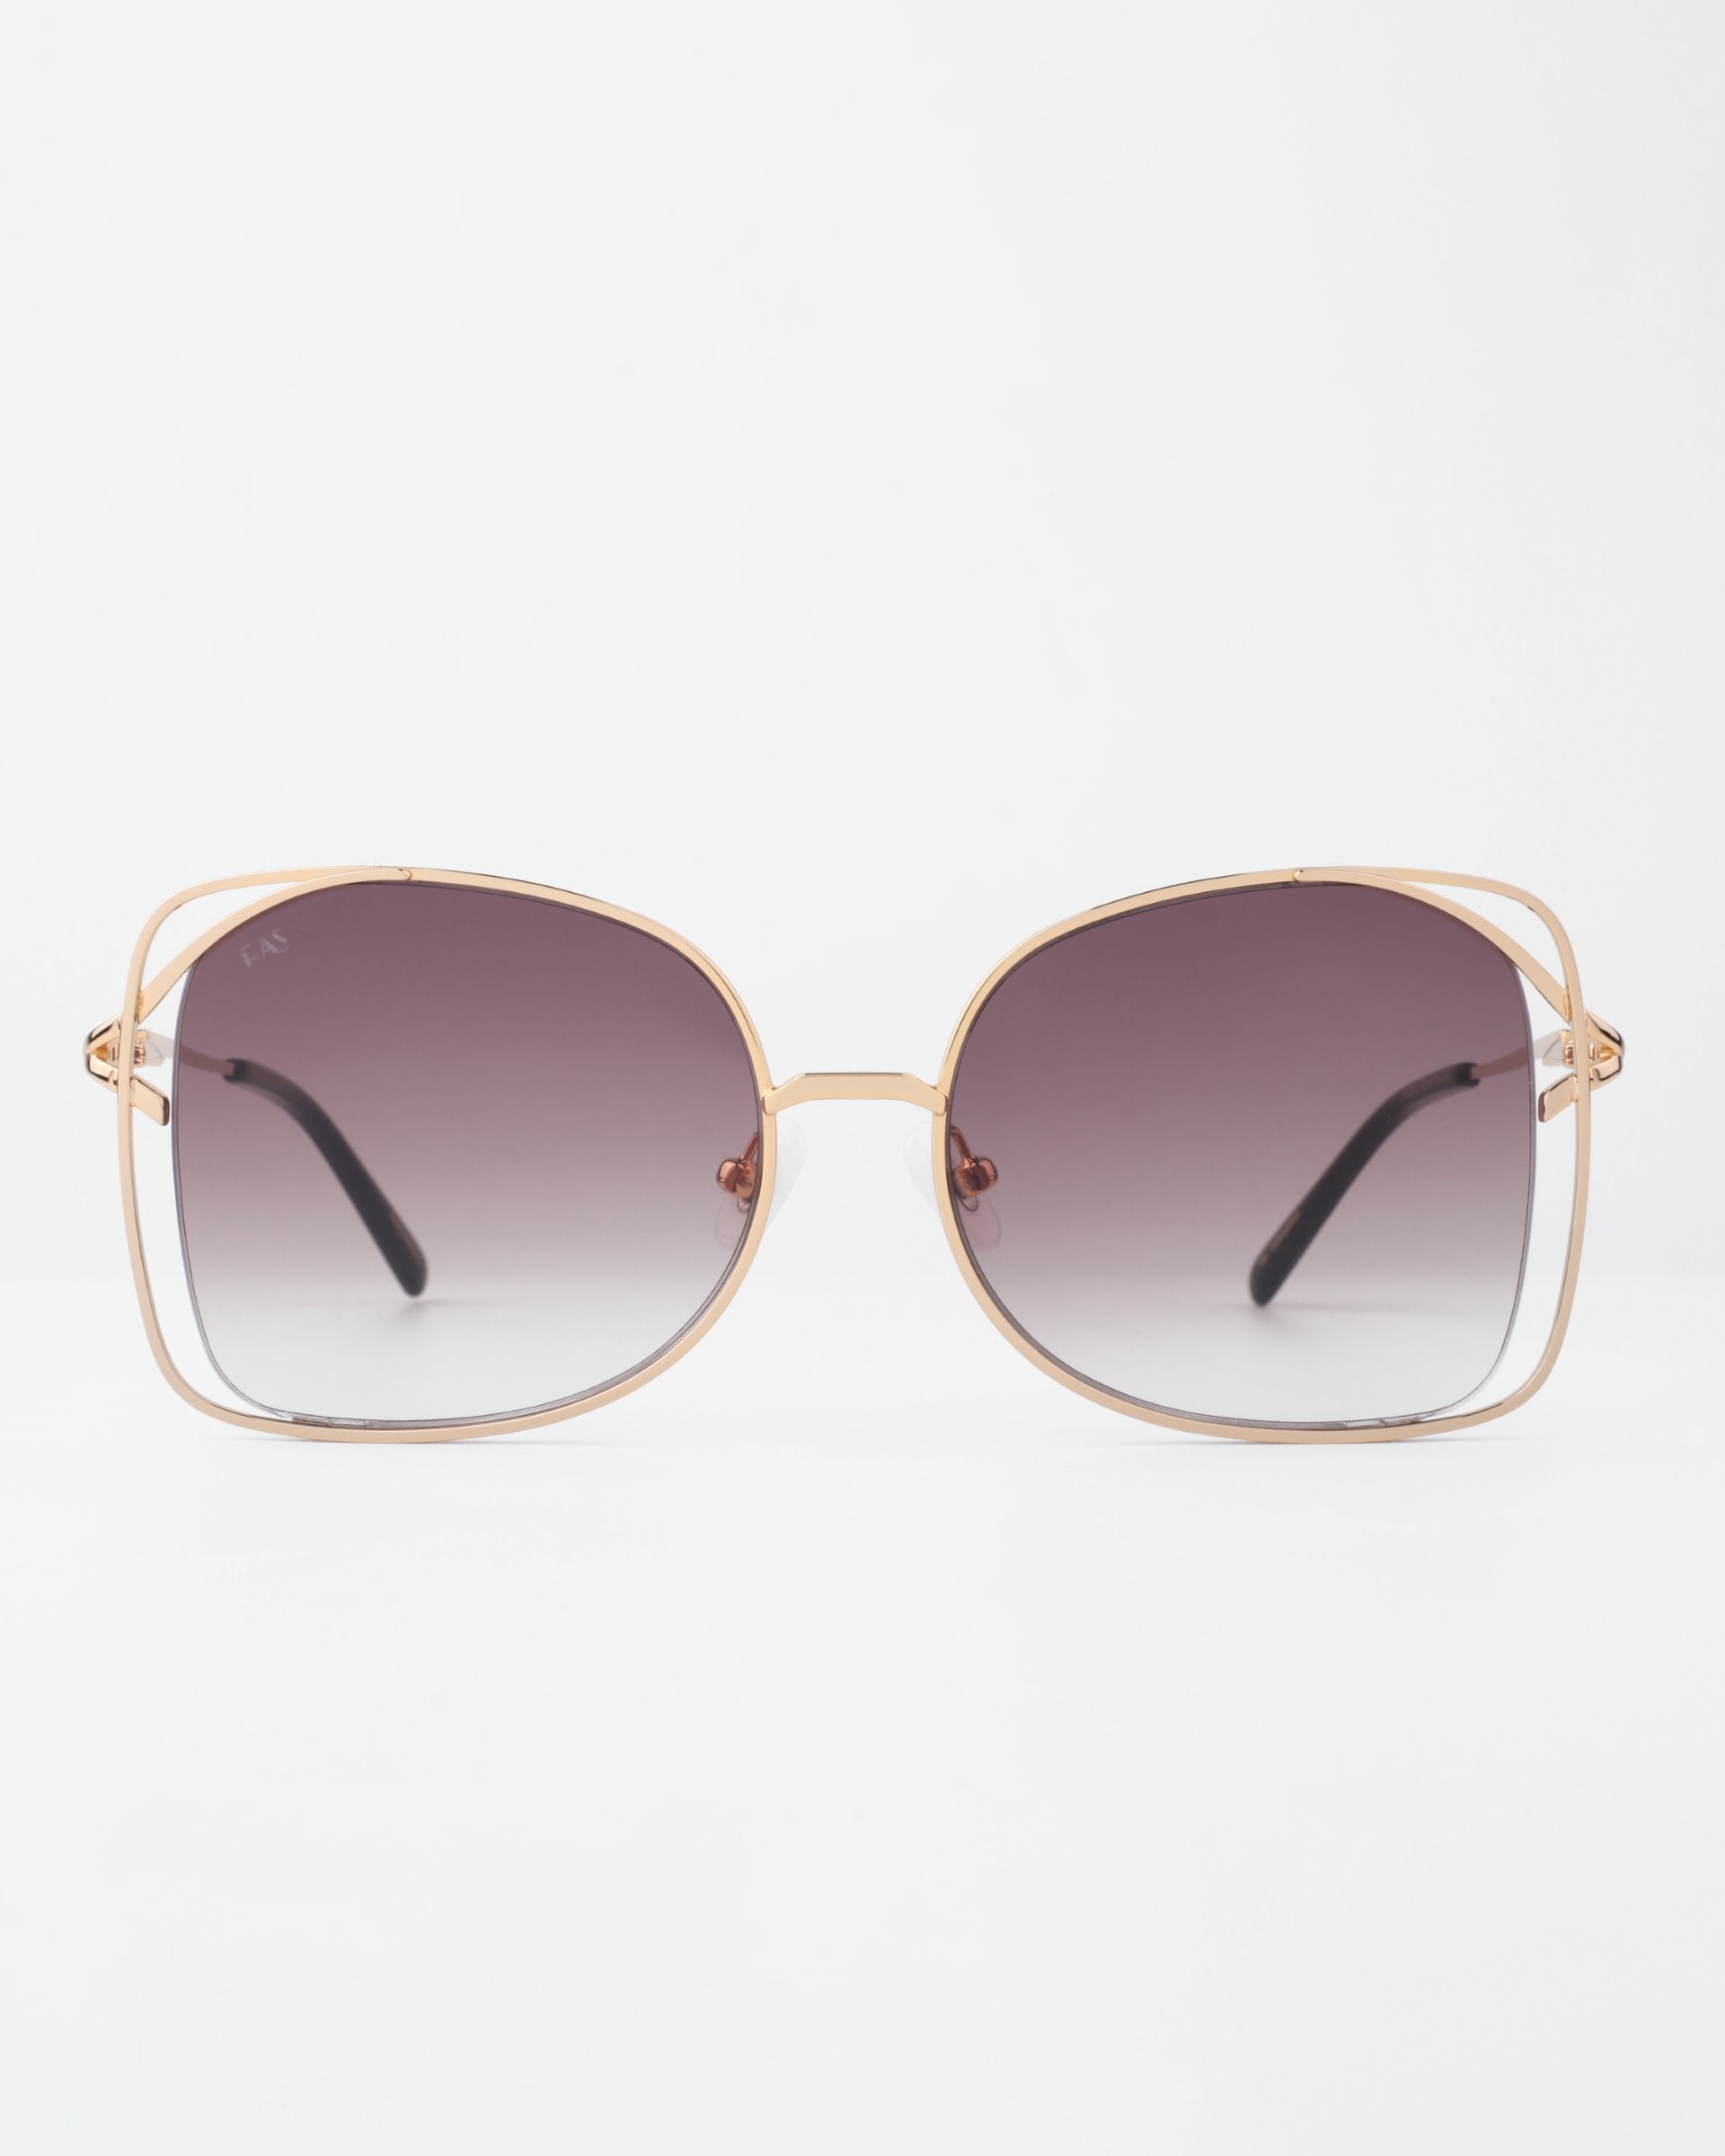 A pair of large, square handmade Carousel sunglasses from For Art's Sake® with gold-plated stainless steel frames and gradient lenses, transitioning from dark at the top to lighter at the bottom. The sunglasses offer UVA & UVB protection and are placed upright against a white background.